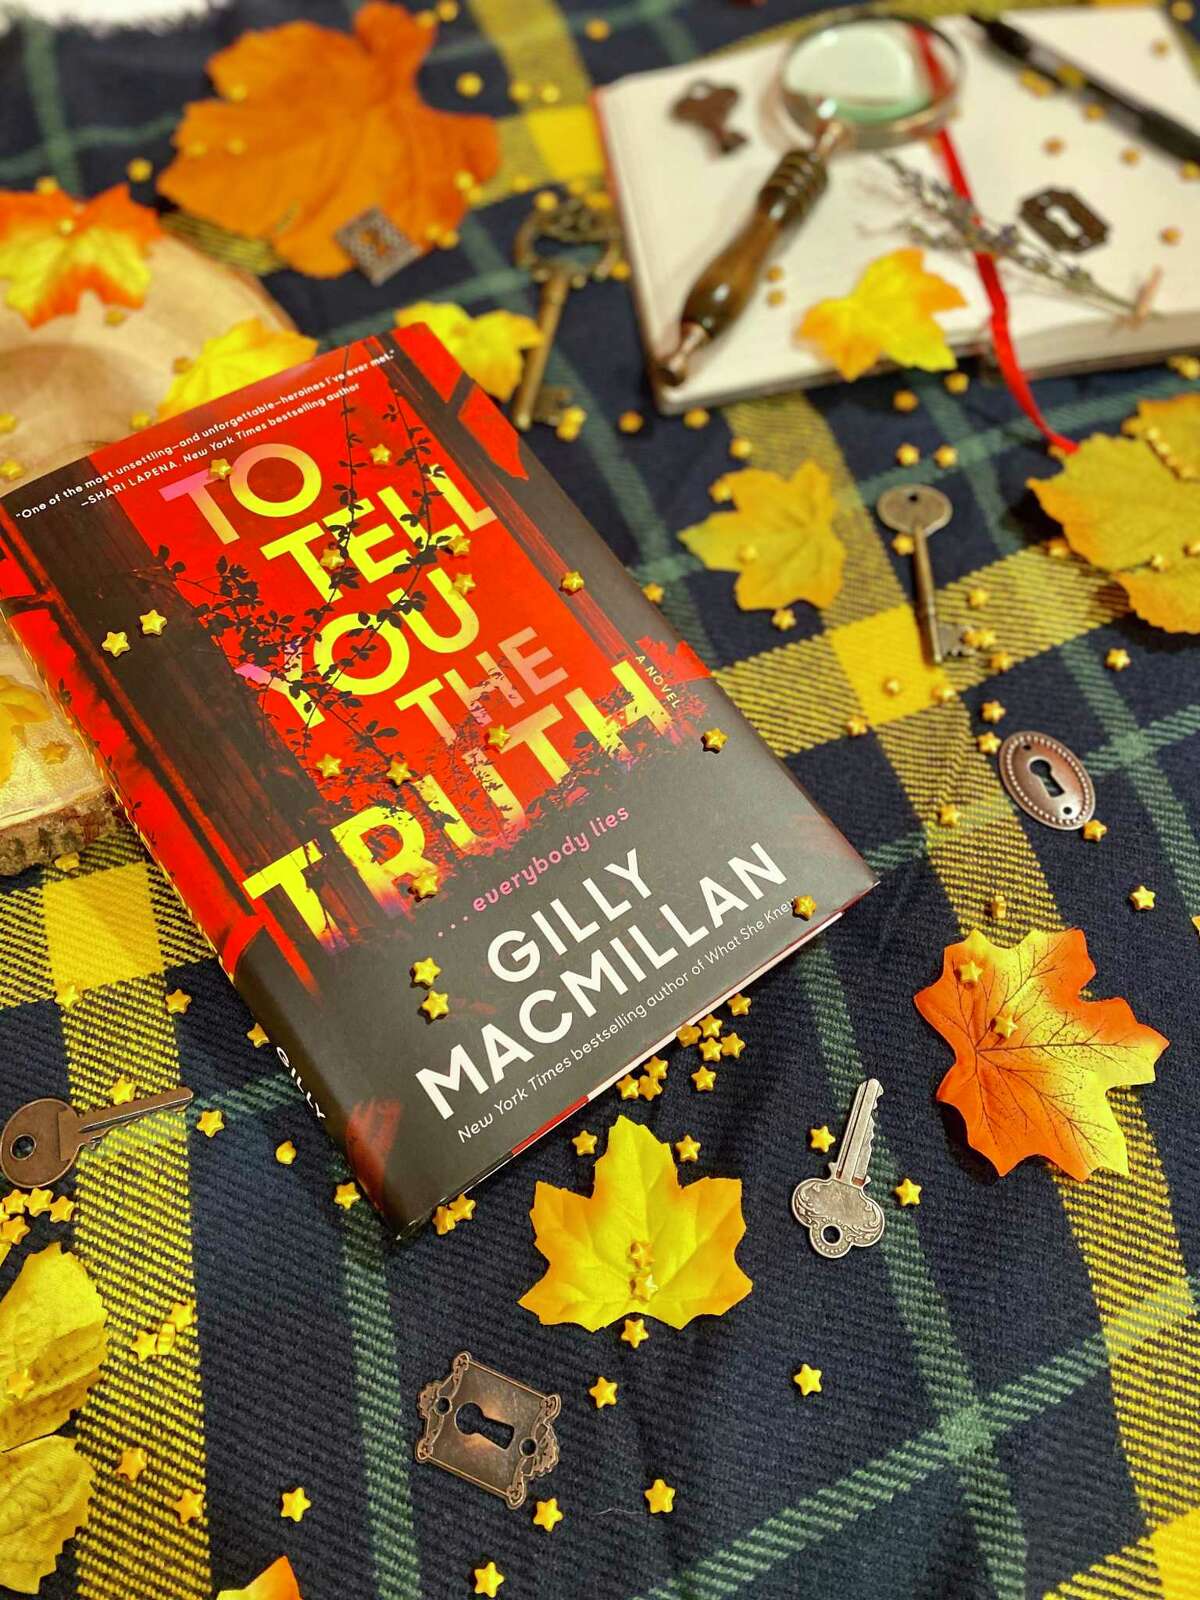 Gilly Macmillan’s latest thriller “To Tell You the Truth” is about a crime novelist who finds herself at the center of a missing person investigation ... again.